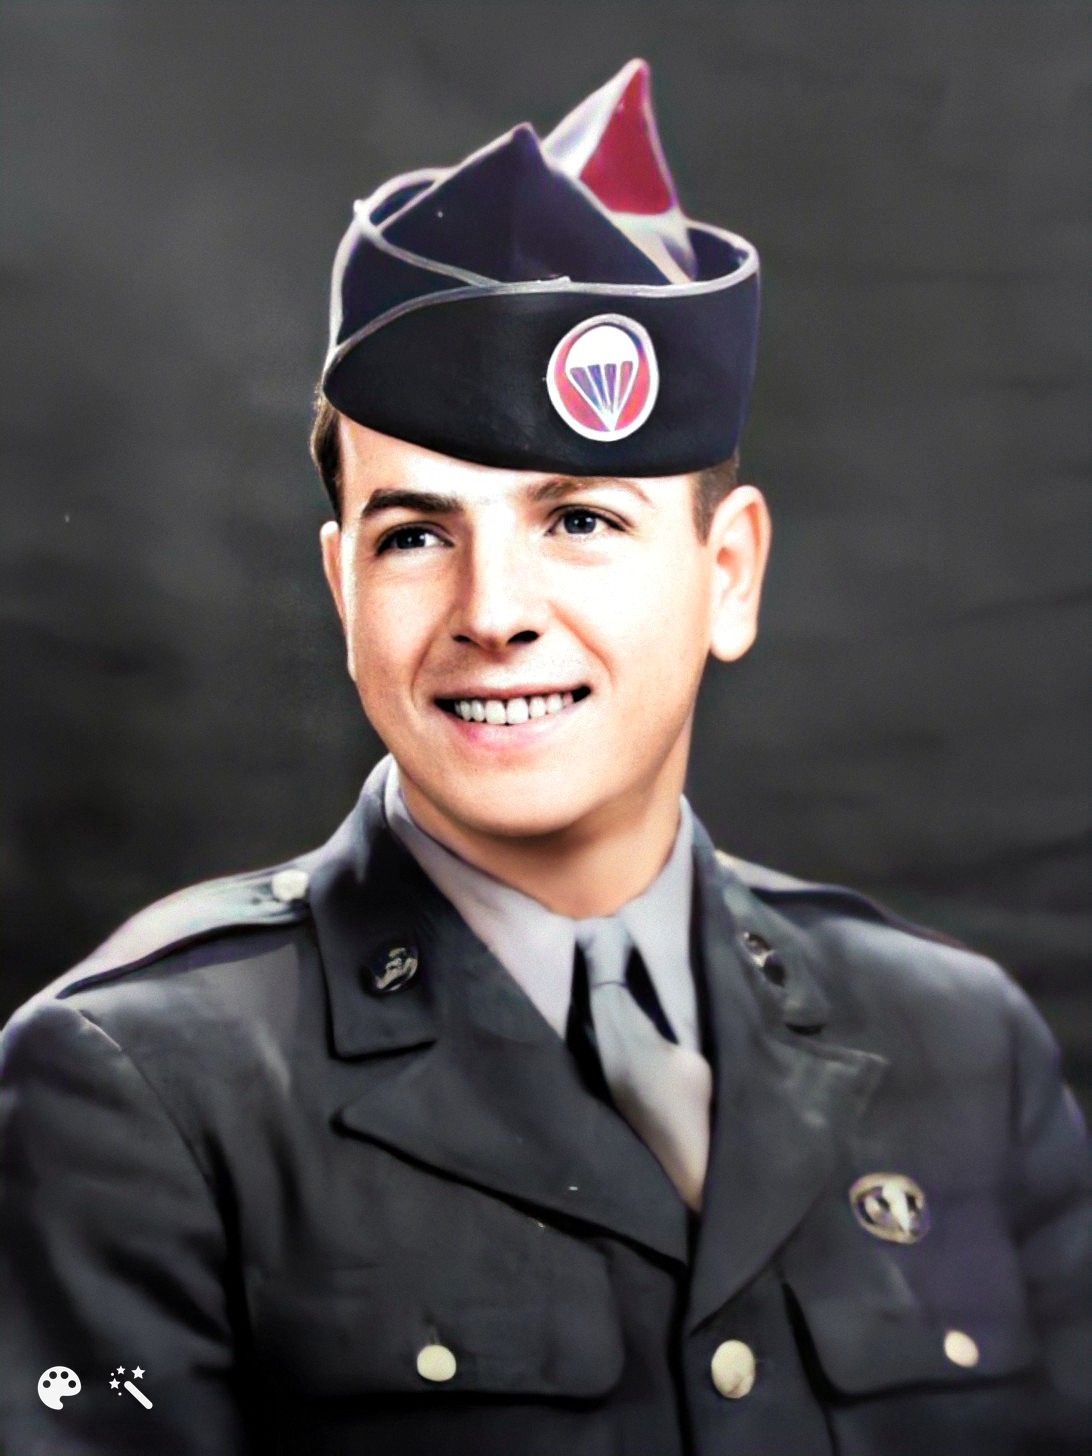 Richard in the military. Photo enhanced and colorized by MyHeritage